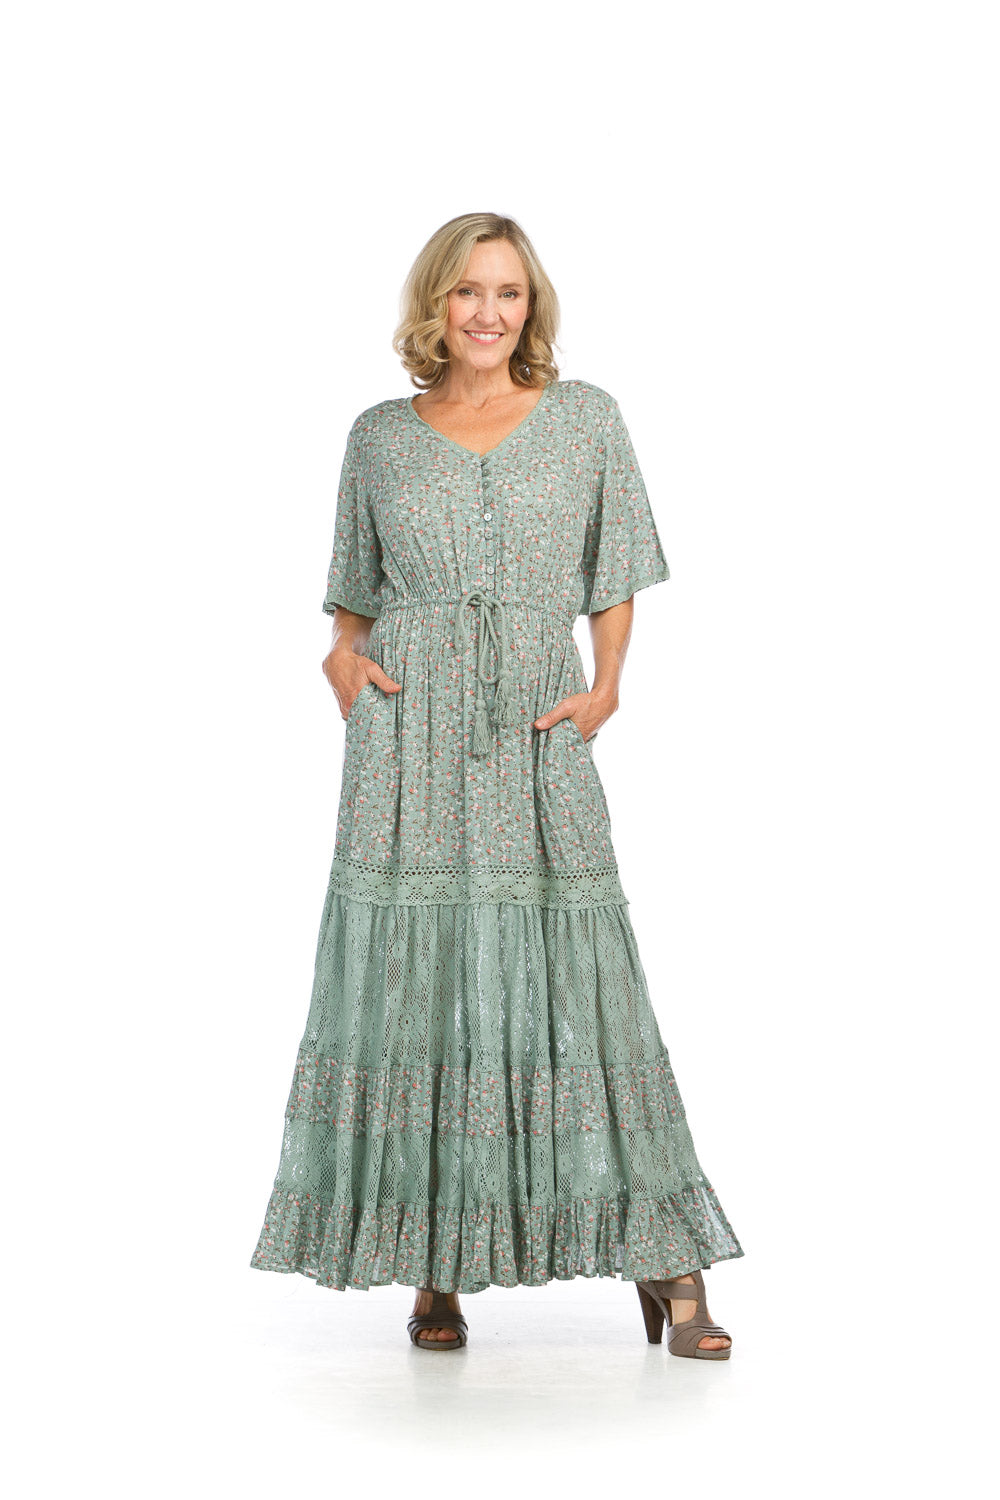 Papillon Dress - Tiered Ditsy Floral - Sage